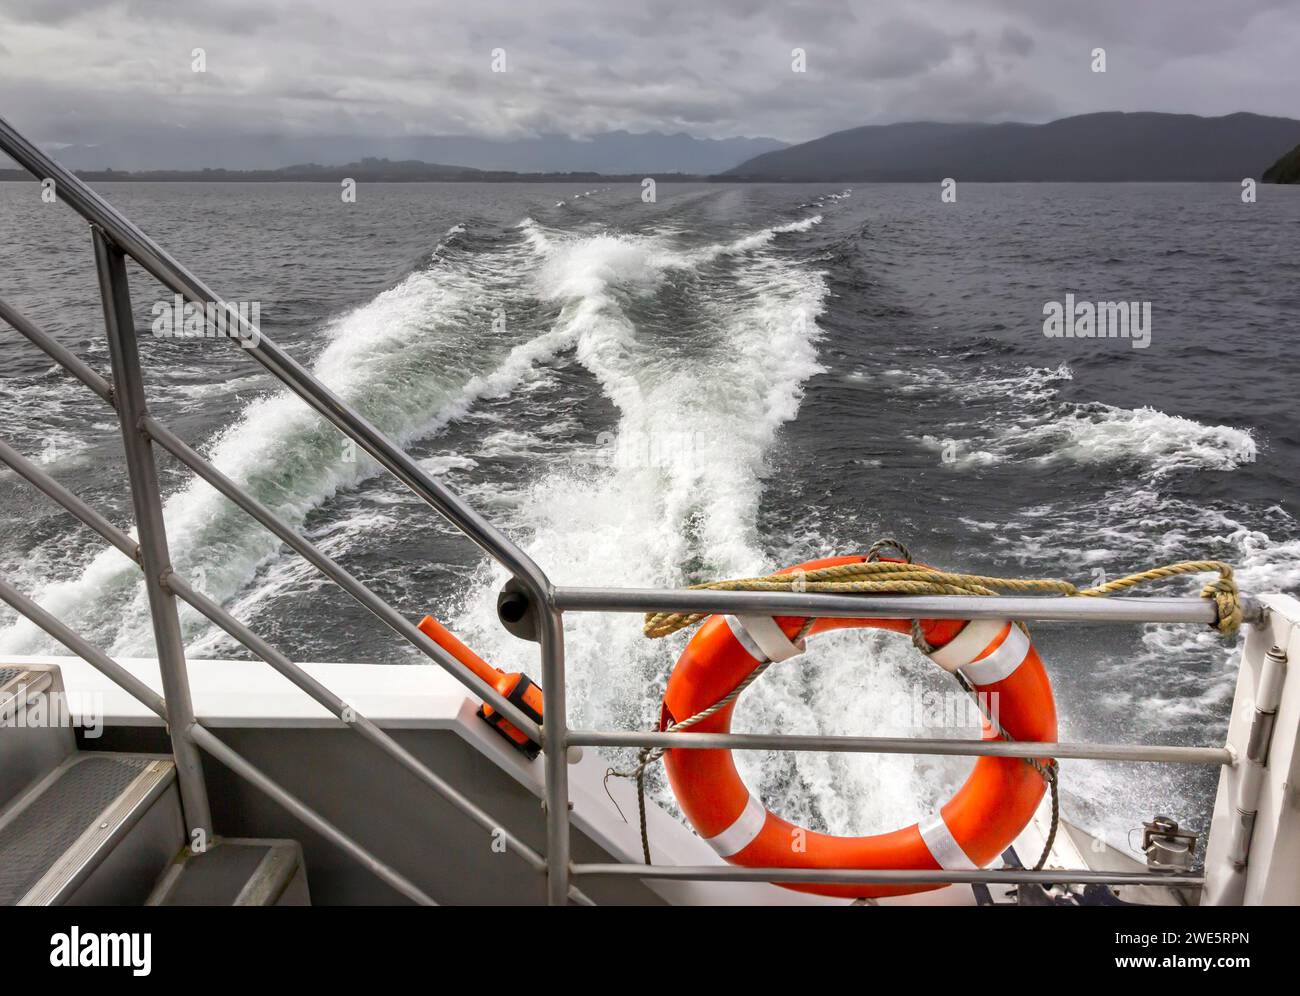 An emergency orange life-saving buoy ring and the fluid dynamics of a wake behind a catamaran passenger ferry crossing Lake Manapouri, New Zealand. Stock Photo